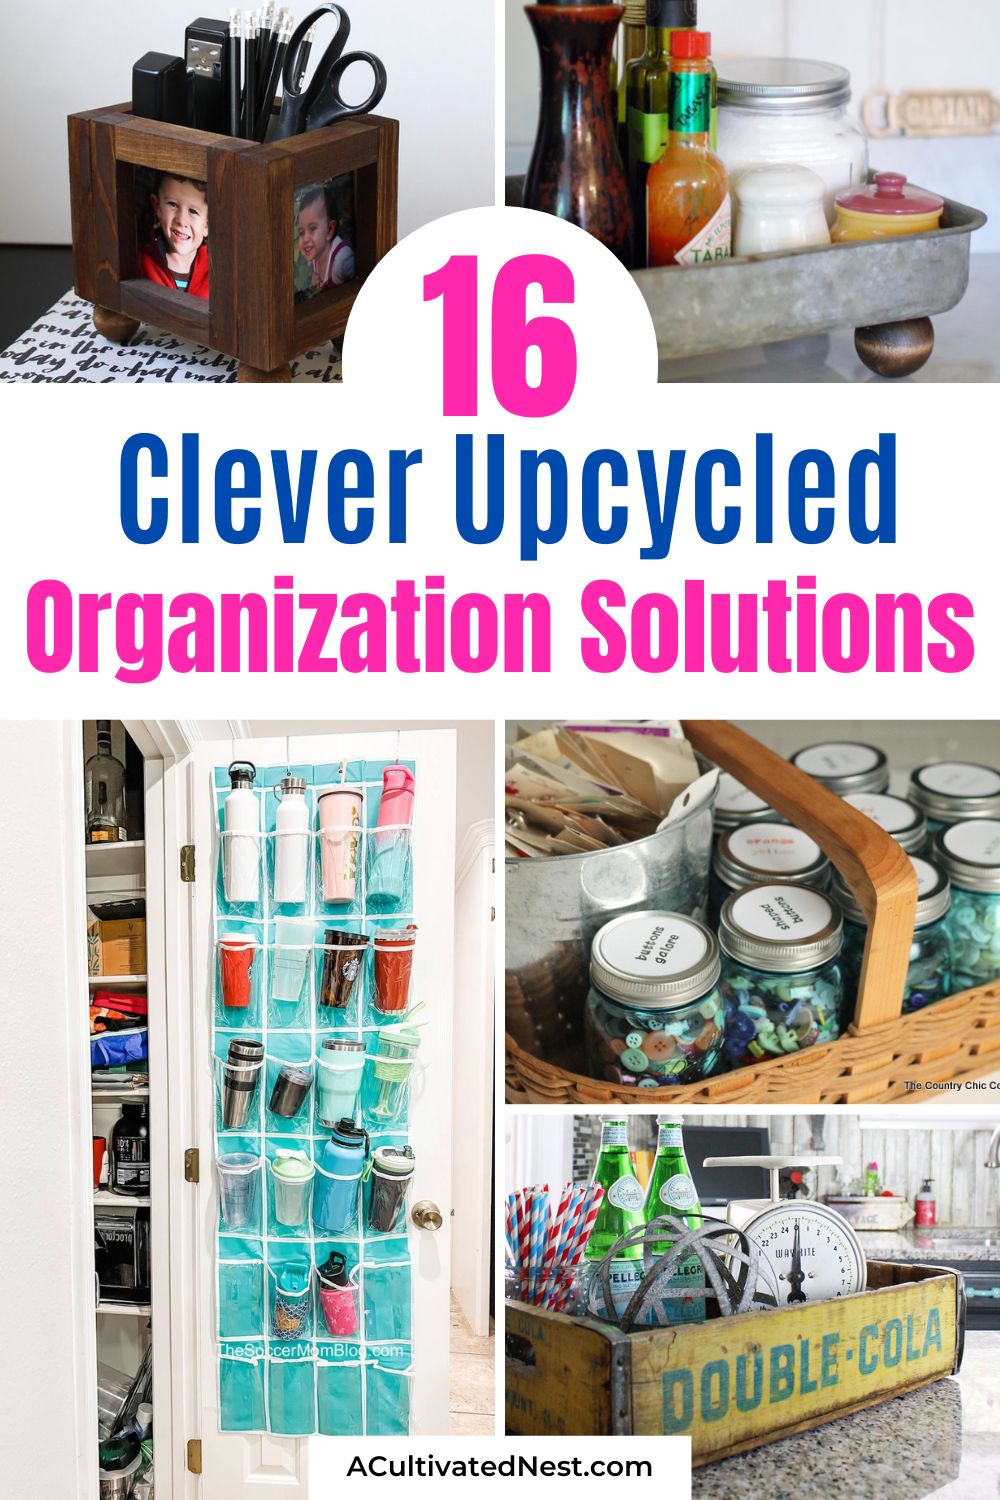 16 Clever Upcycled Organization Solutions- Get inspired to organize on a budget! Dive into ingenious upcycled organization solutions for your clutter. Turn old items into functional storage gems and give your space a fresh, frugal makeover! | #Upcycling #OrganizingHacks #organization #diyProjects #ACultivatedNest